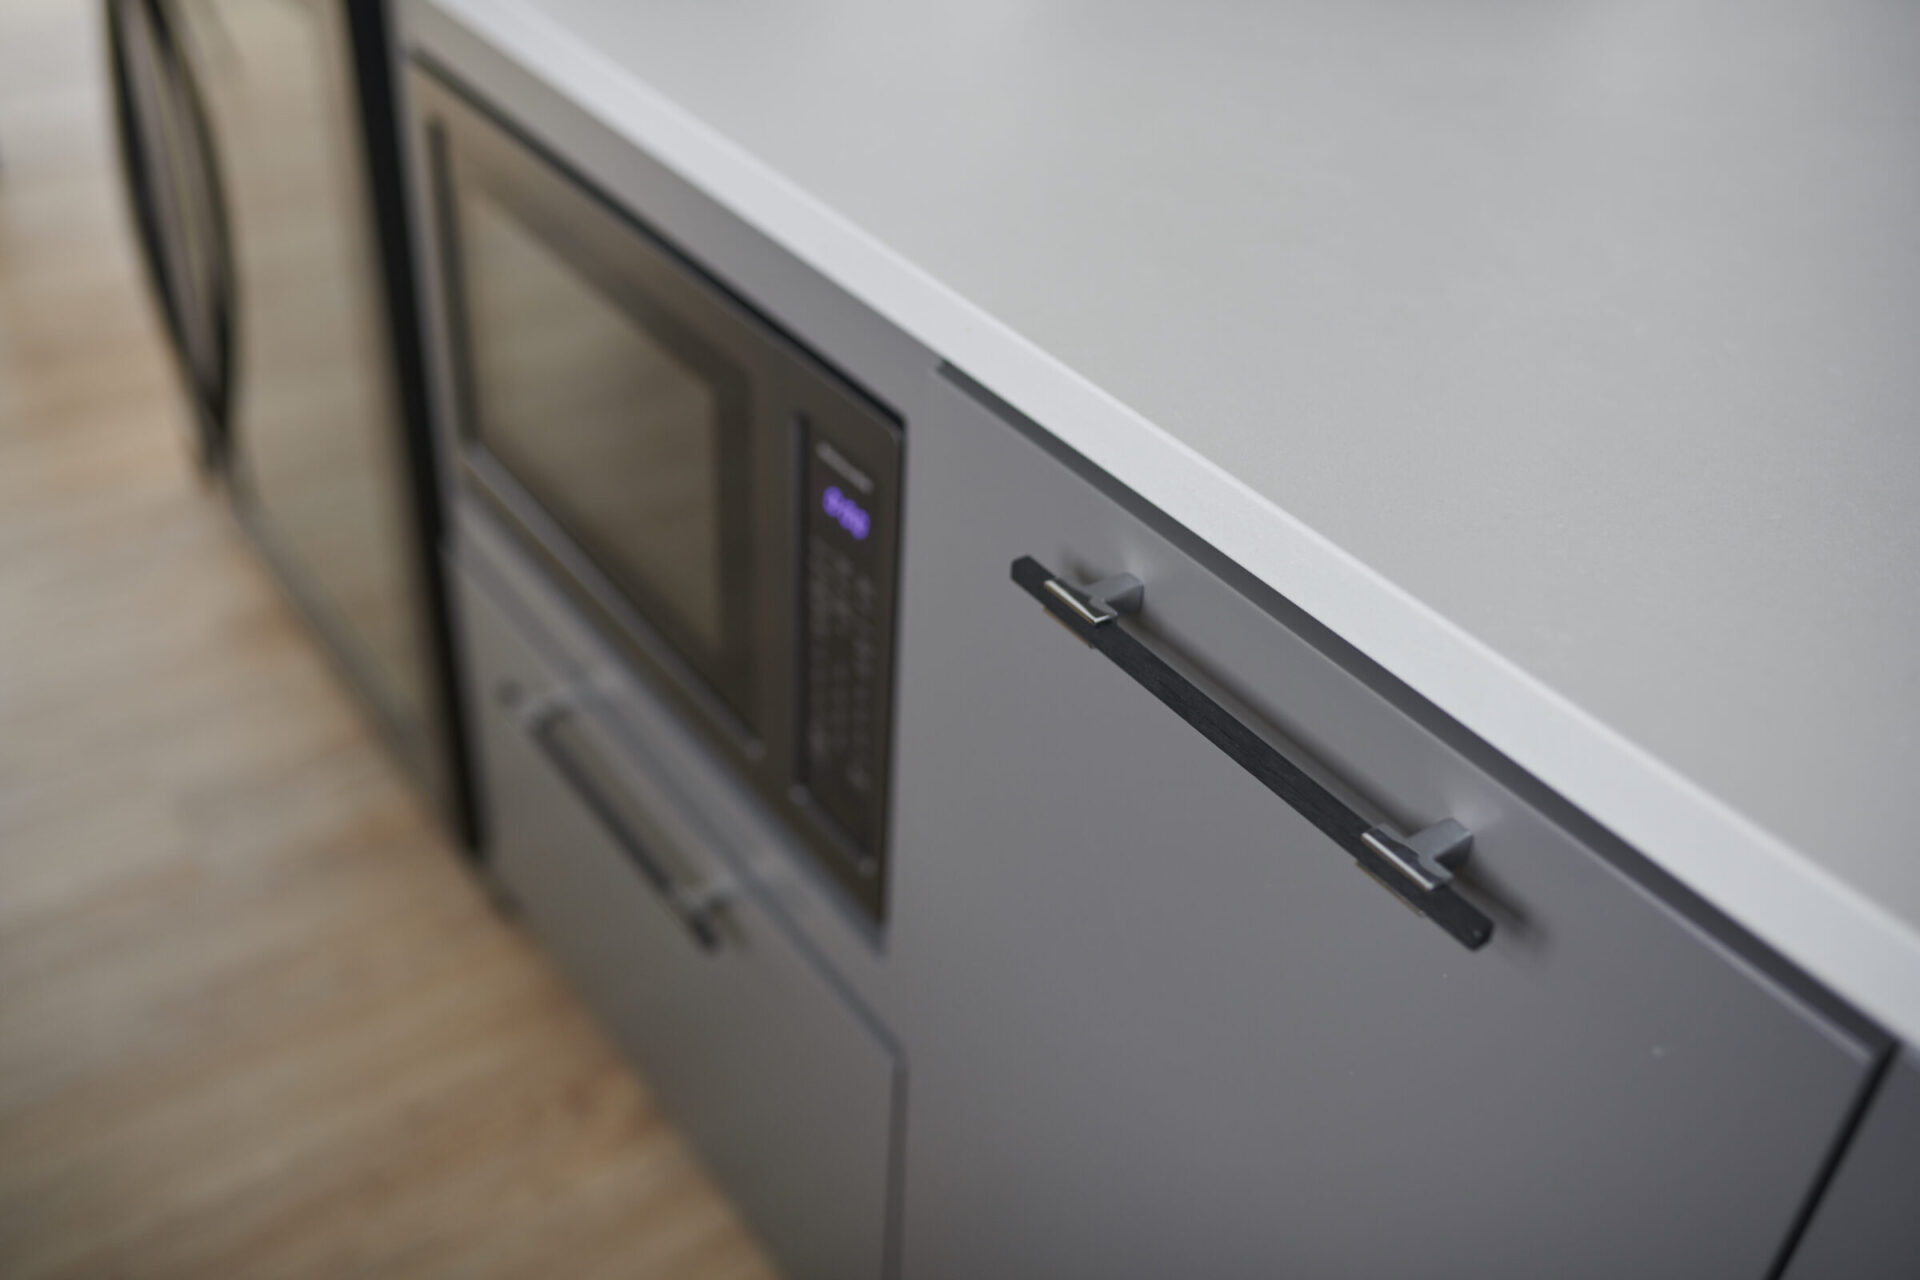 Modern kitchen with built-in stainless steel microwave and oven, sleek gray cabinetry with black handles, and wooden flooring. Focus is slightly blurred.